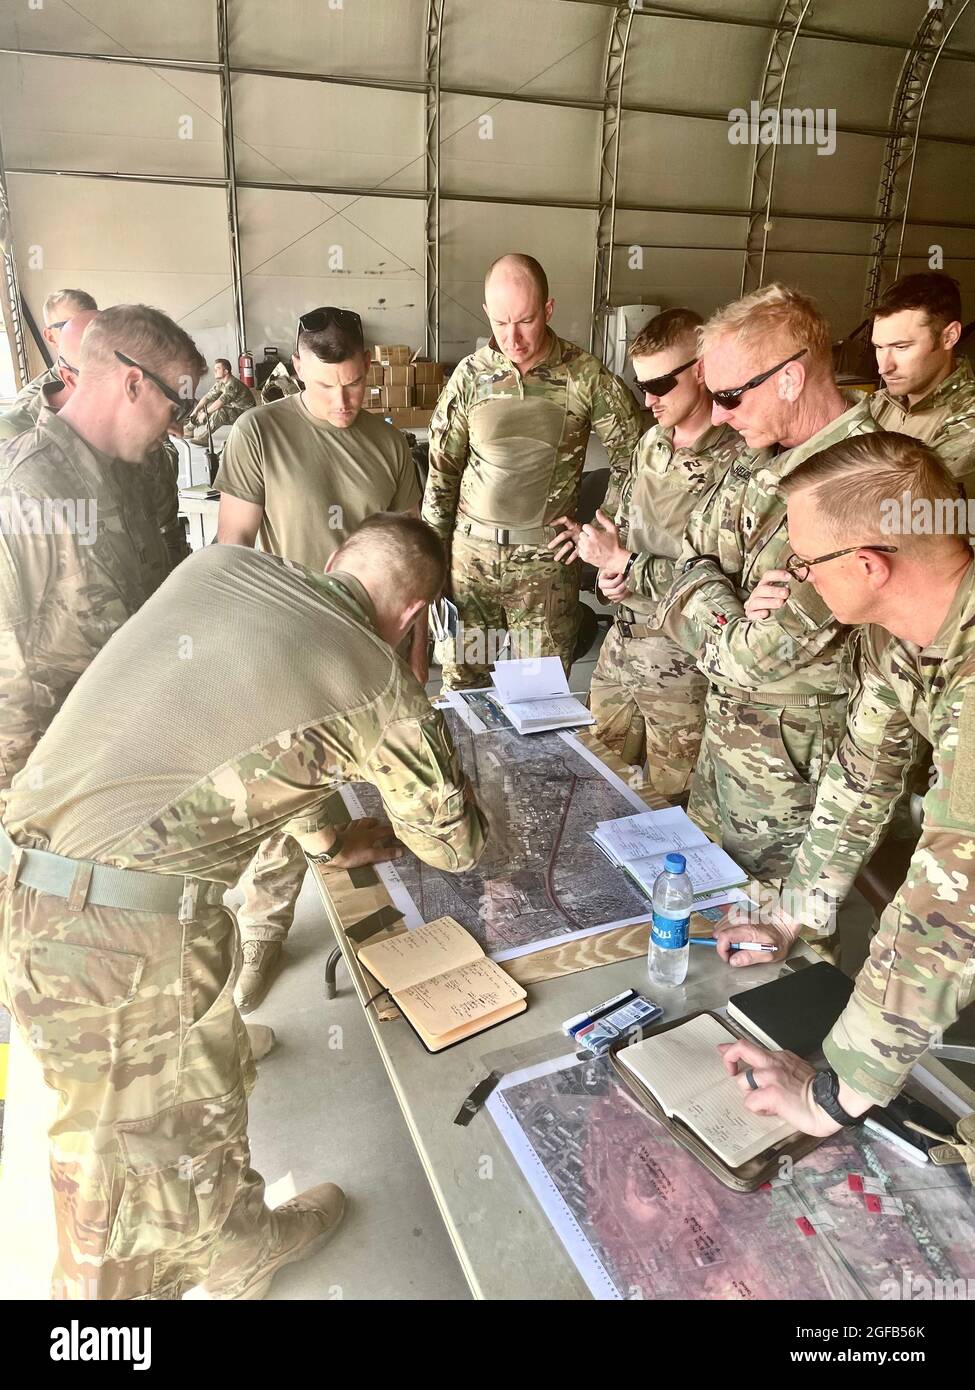 Army Maj. Joseph Genin, Task Force operations officer, briefs Battalion Commander Lt. Col. Jacob Helgestad, company commanders, and task force staff on current operations at Hamid Karzai International Airport on August 21, 2021. With its strategic assignment at Camp Buehring, Task Force 1-194 was positioned to respond to the Noncombatant Evacuation Operation announced by the Department of State and supported by the Department of Defense.  Approximately 1,100 Soldiers from Task Force 1-194 deployed to the Middle East in early 2021 for a nine-month mission in support of Operation Spartan Shield. Stock Photo